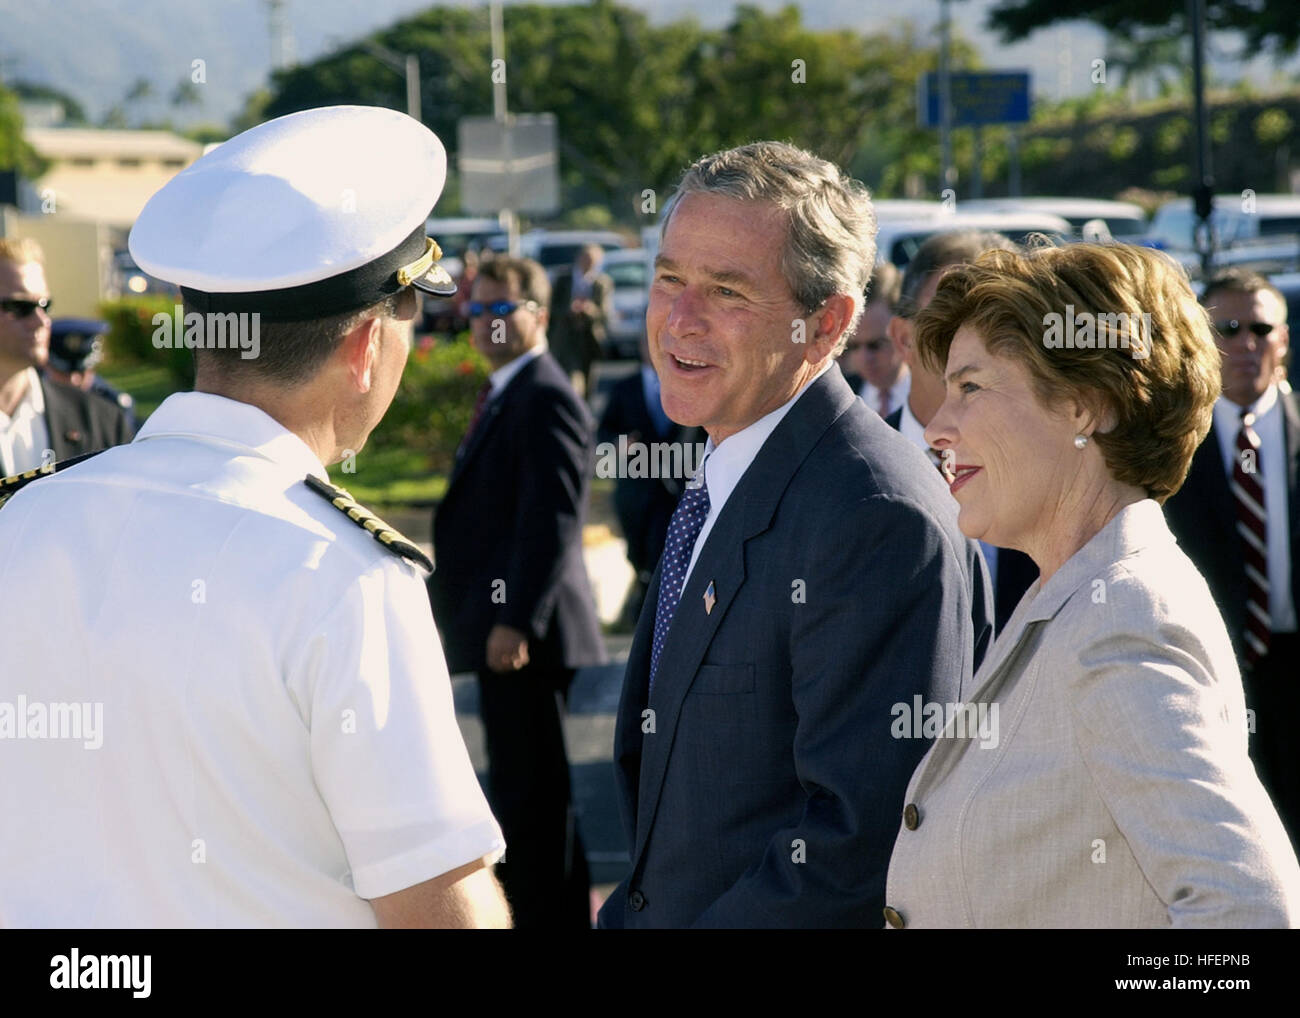 031023-N-7590D-079 Naval Station Pearl Harbor, Hawaii (Oct. 23, 2003) -- President George W. Bush and First Lady Laura Bush are greeted by Captain Ronald R. Cox, Commander Naval Station Pearl Harbor Hawaii, during the Presidents visit with veterans and service members aboard the station. President Bush stopped in Hawaii on his way back from the Asia-Pacific Economic Cooperation Forum in Thailand, the Philippines, Japan, Singapore, and Bali where he discussed security and the continued fight against terrorism.   Asia- Pacific Economic Cooperation, or APEC, is the premier forum for facilitating  Stock Photo